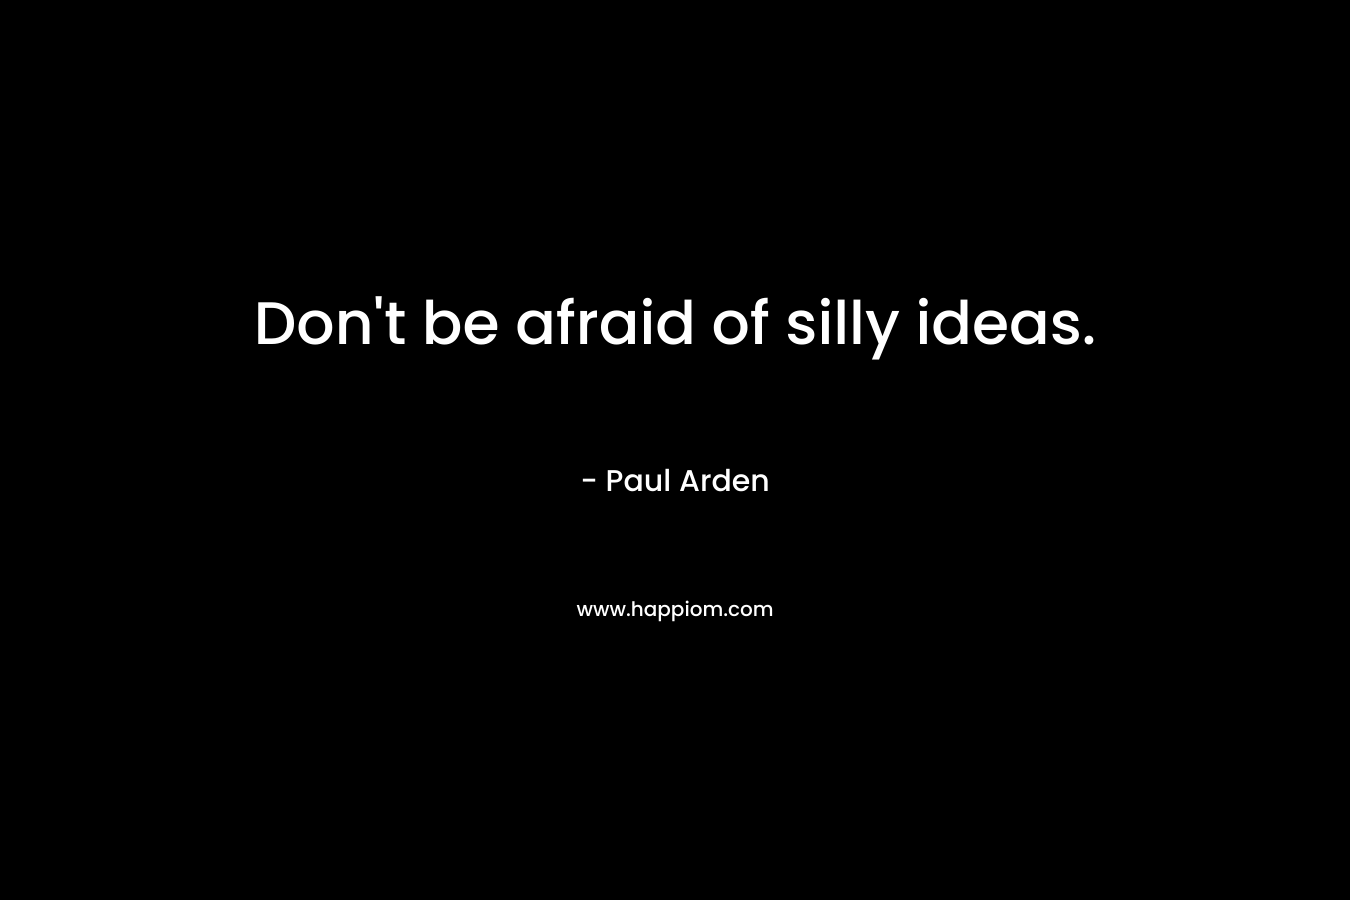 Don't be afraid of silly ideas.